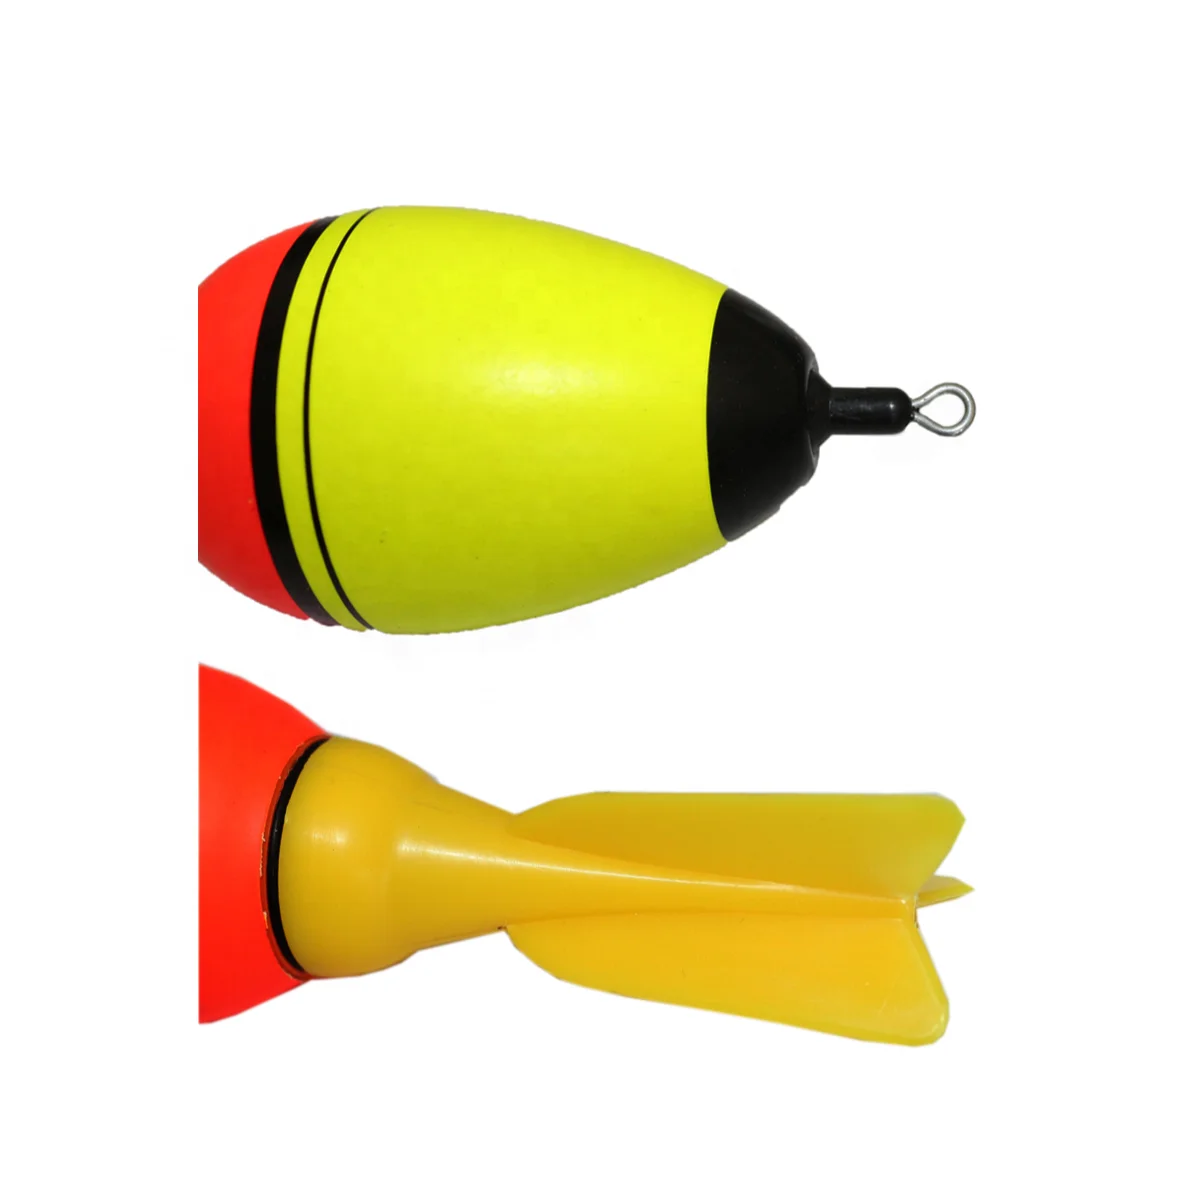 Manufacturers supply low-cost fishing buoys 20g/30g/40g/50g/60g/80g/100g